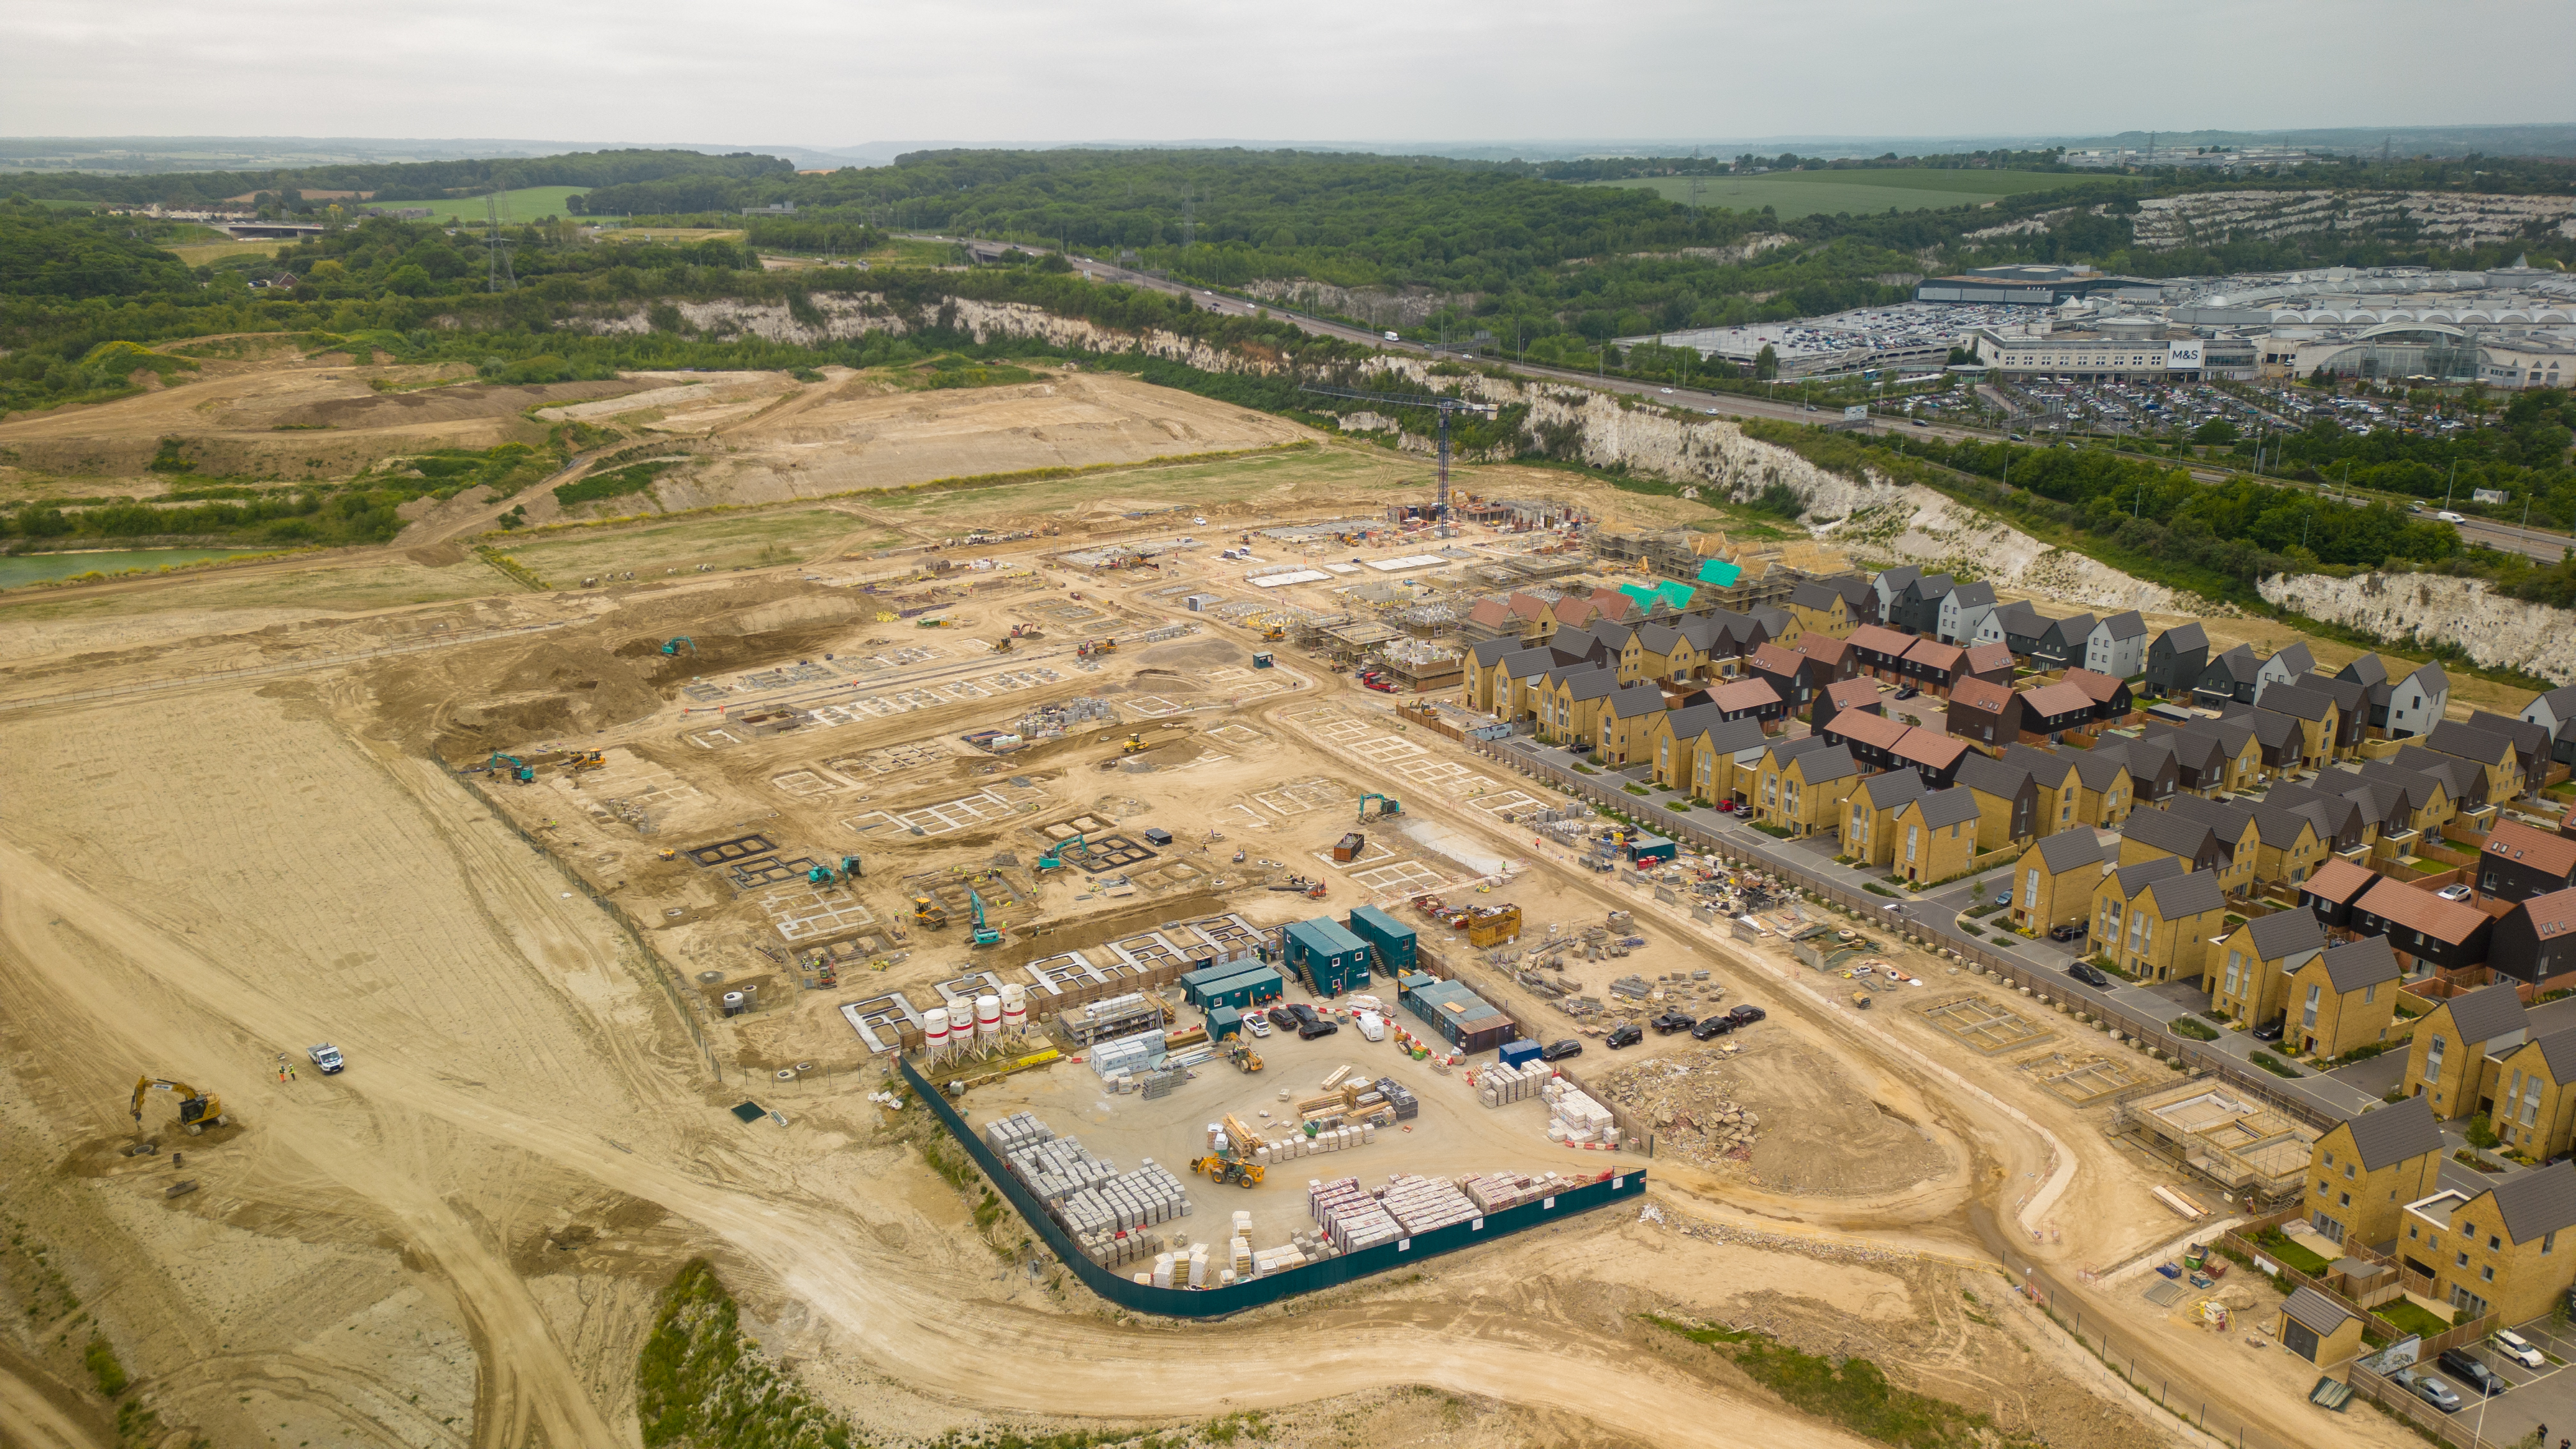 Drone image of building site